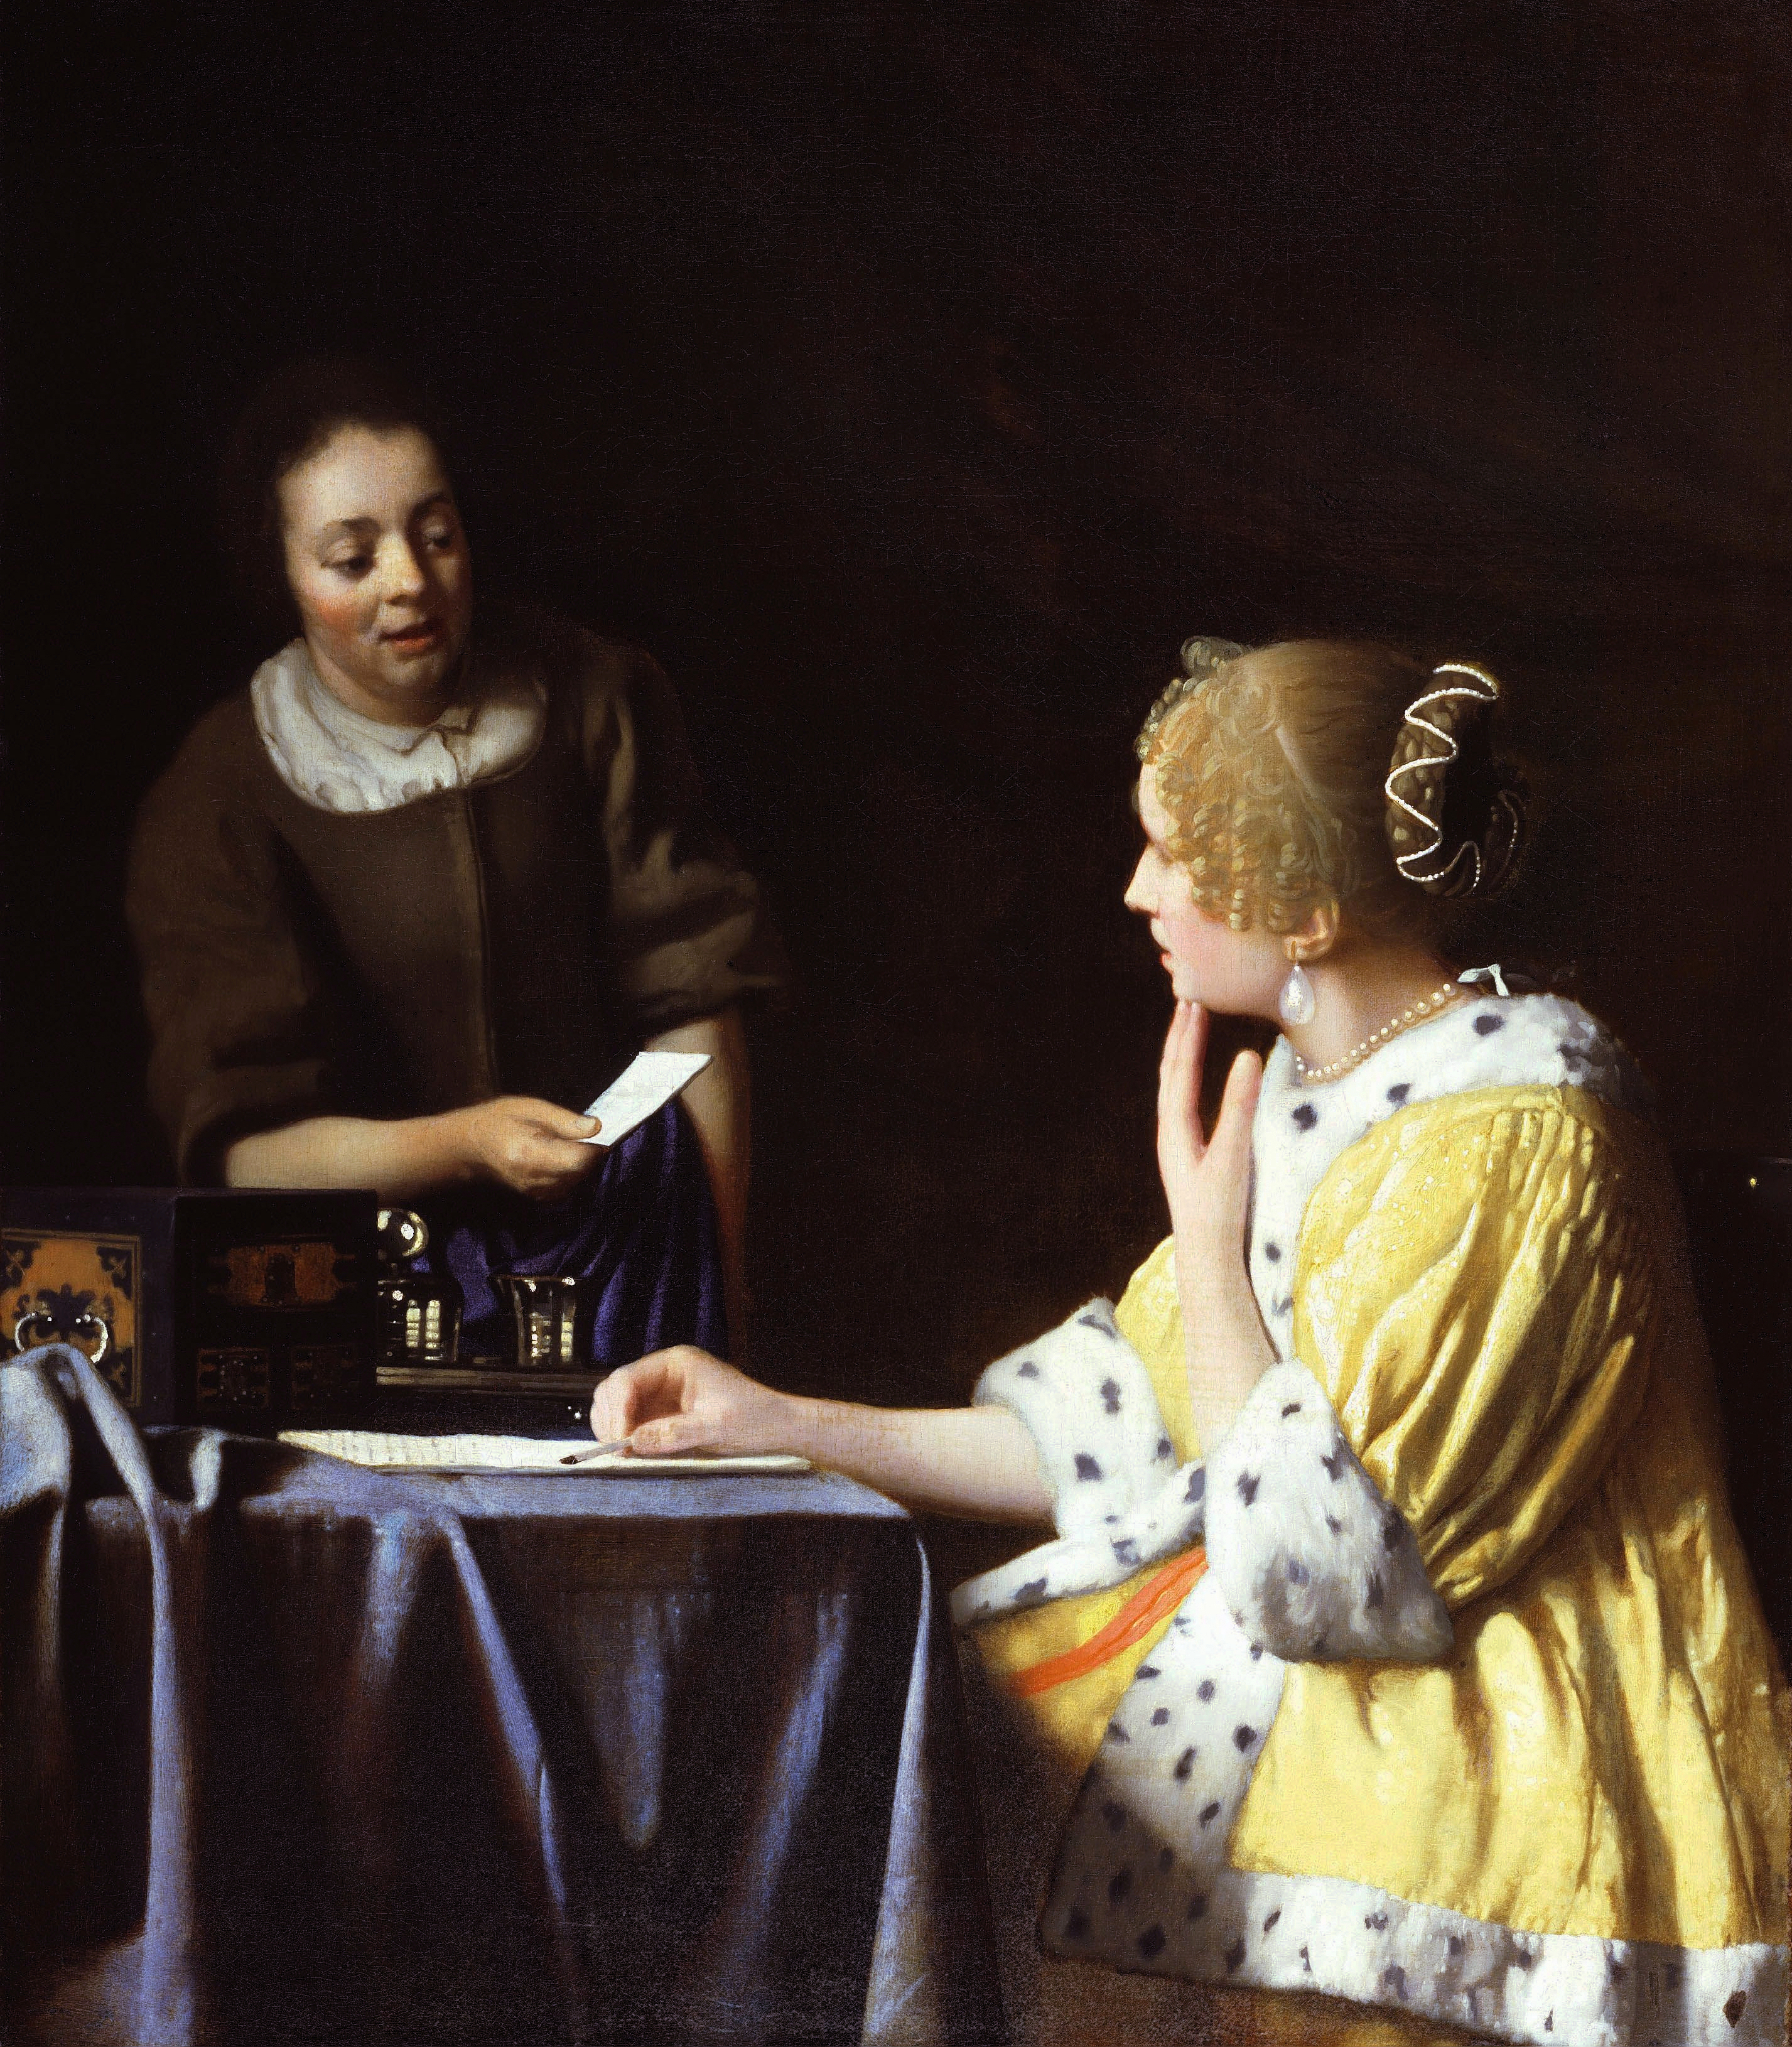 Herrin und Magd by Johannes Vermeer - 1666/1667 - 90,2 x 78,7 cm The Frick Collection